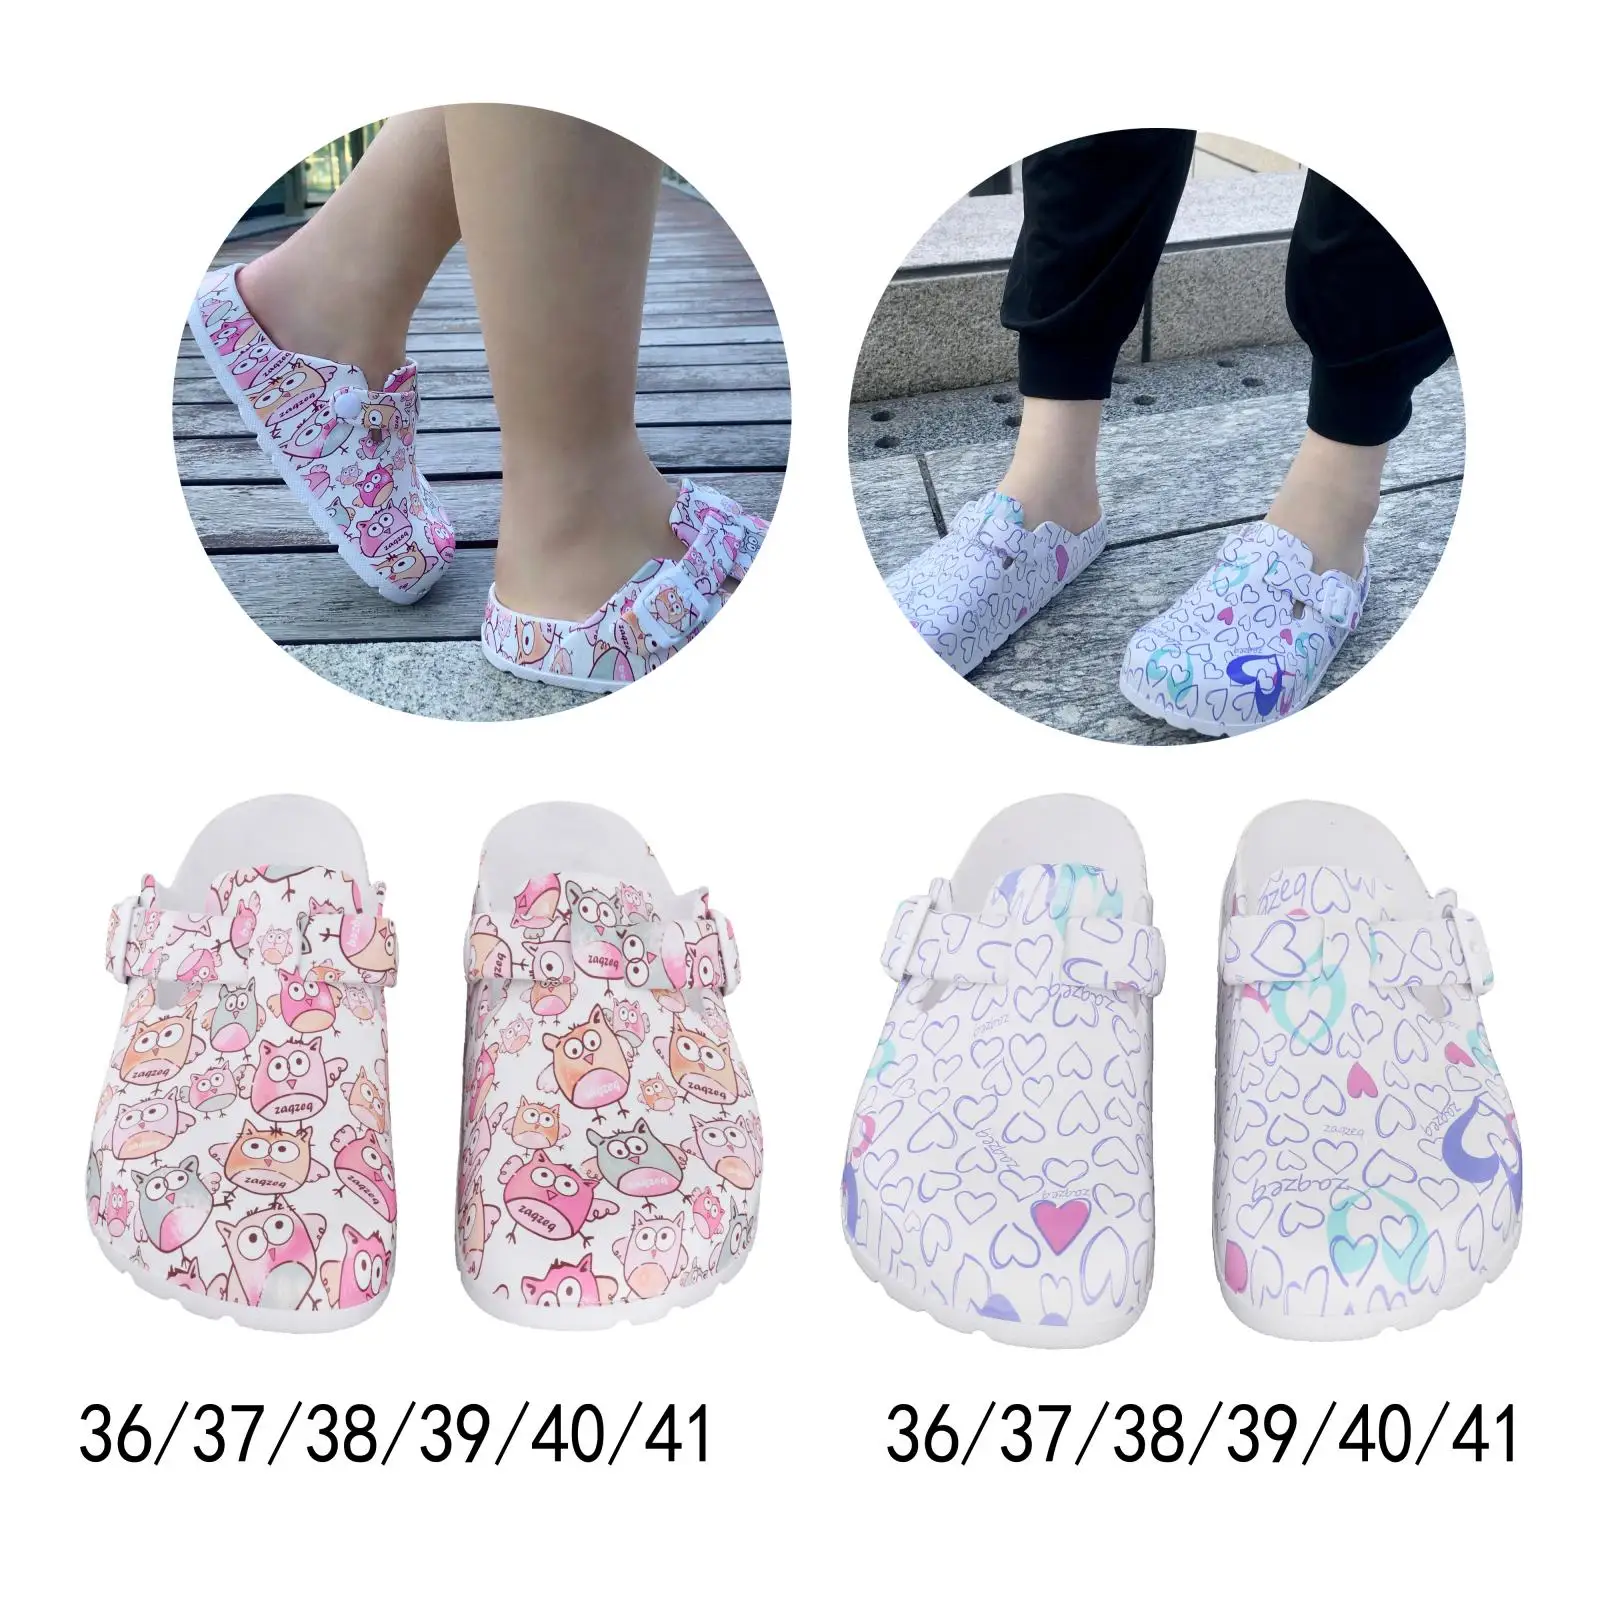 Womens Operating Room Work Nursing Clogs Shoes -Anti Slip Chef Shoes Slipers Summer Outdoor Soft Insole Footwear Shoe Sliper